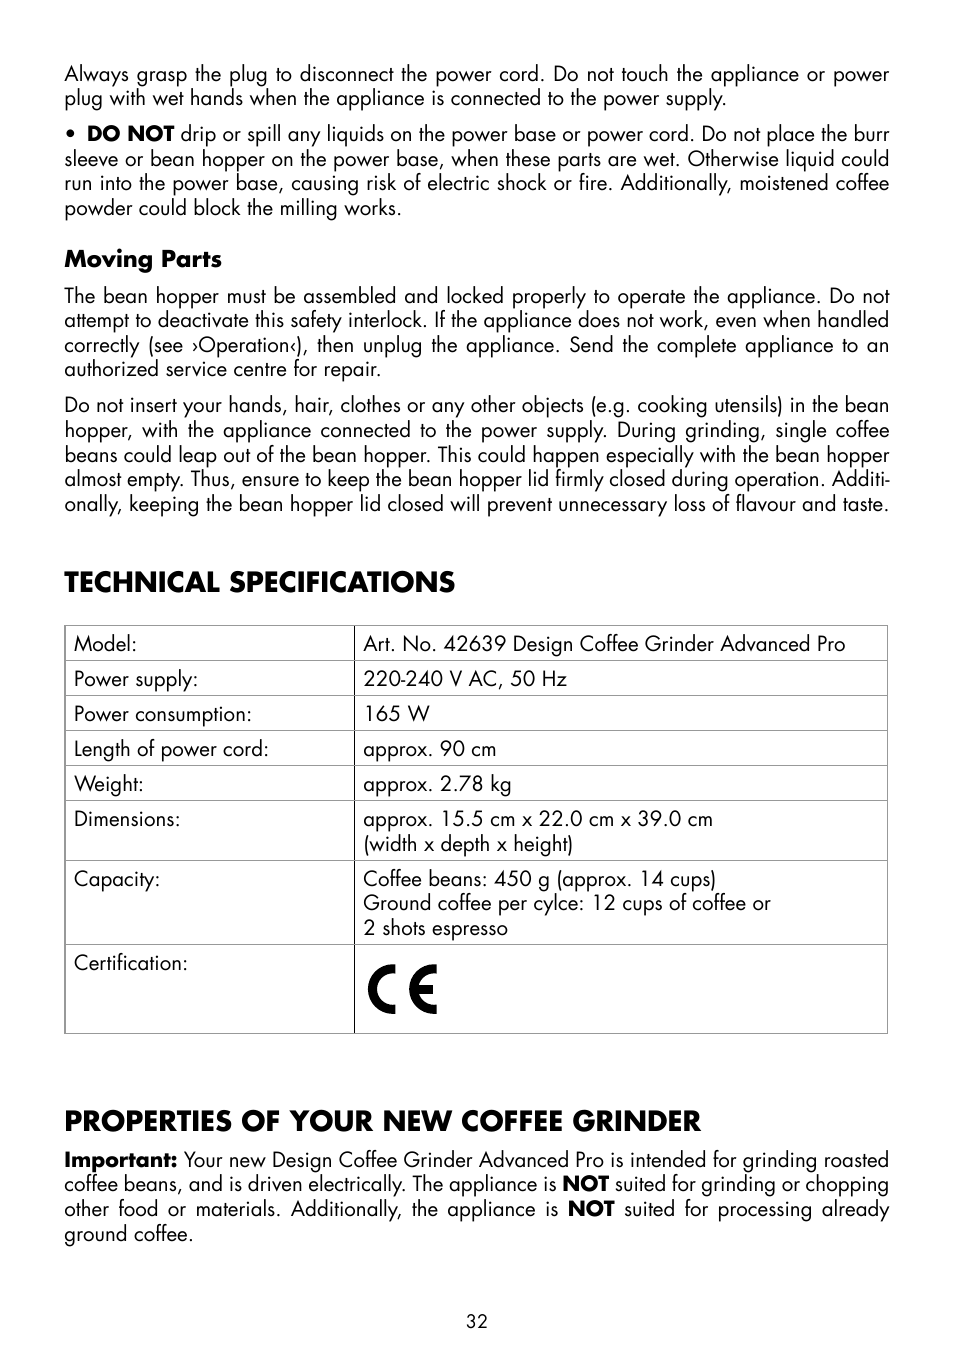 Technical specifications, Properties of your new coffee grinder | Gastroback  42639 Design Coffee Grinder Advanced Pro User Manual | Page 8 / 23 |  Original mode